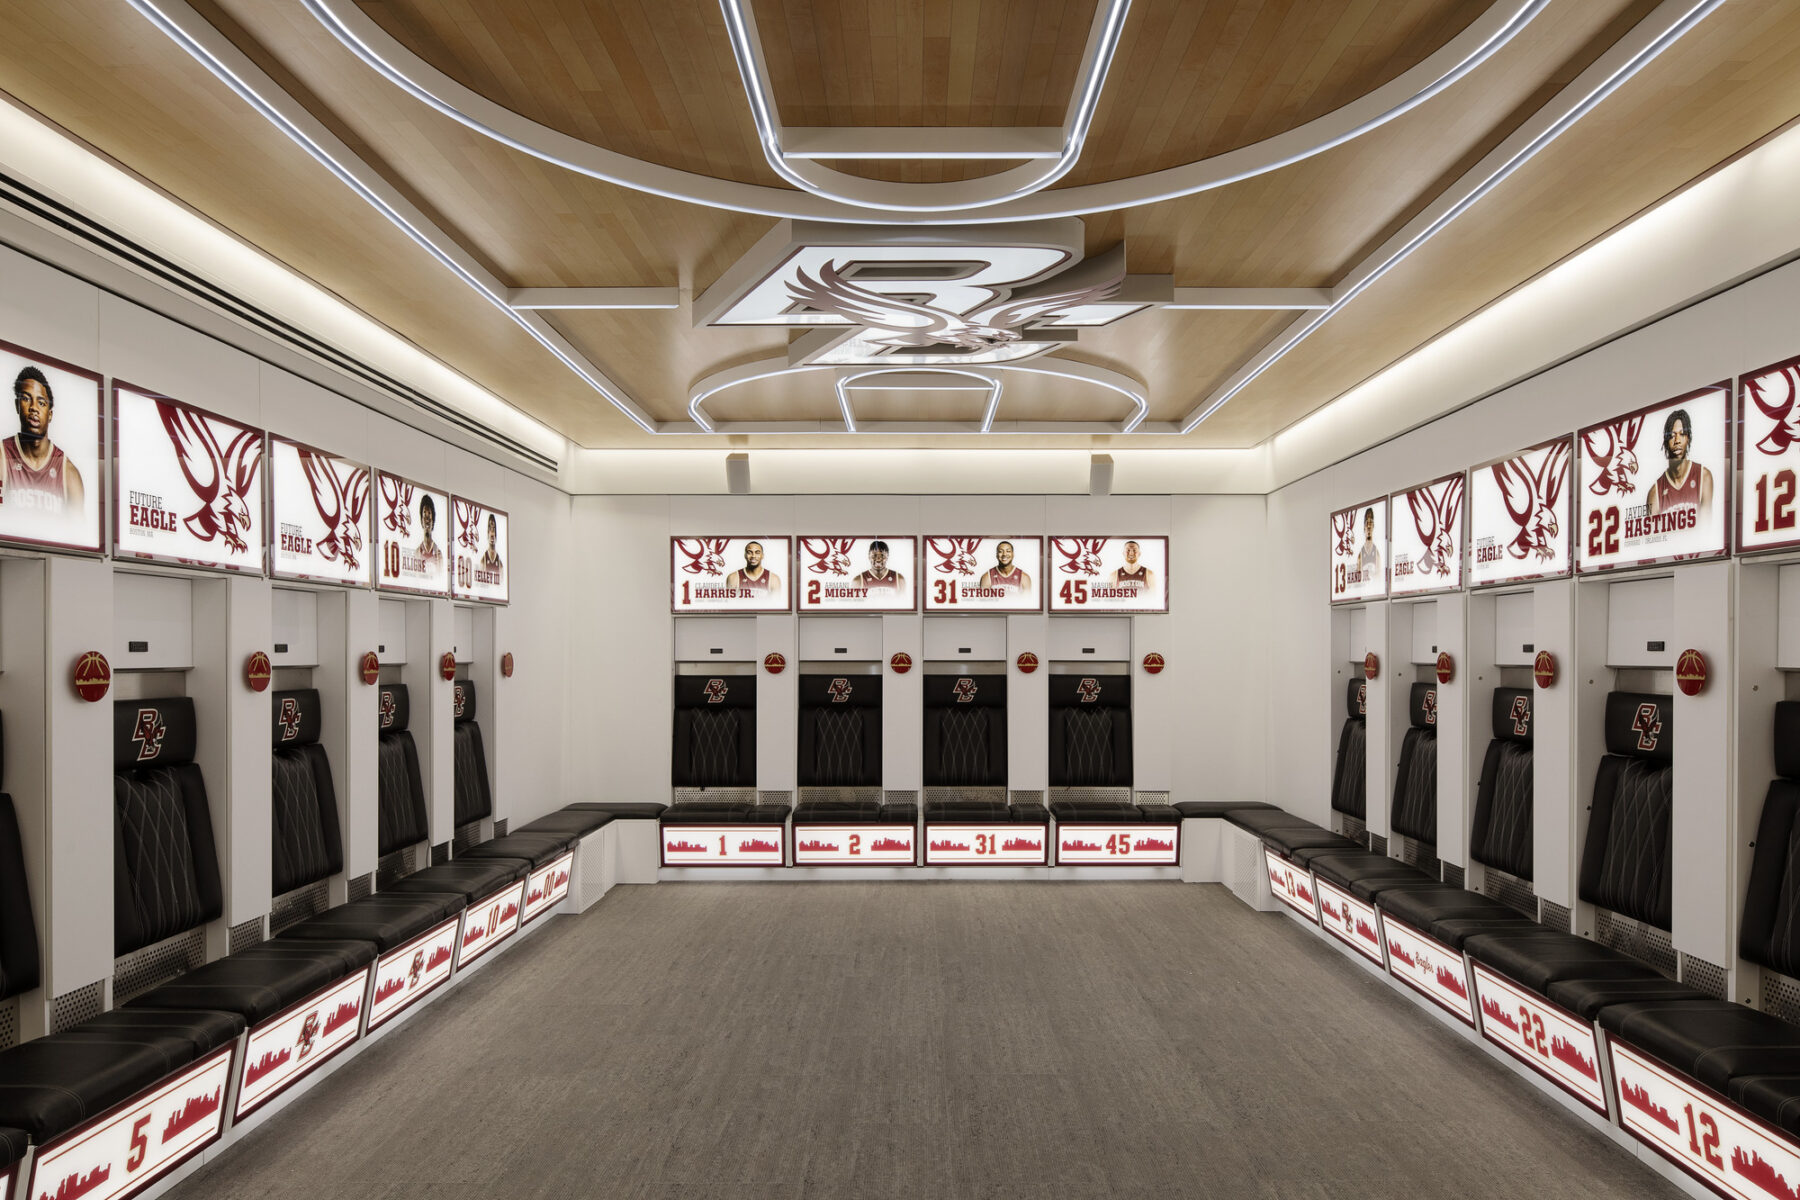 photo of locker room with illuminated player photos and design of basketball court and BC logo on the ceiling